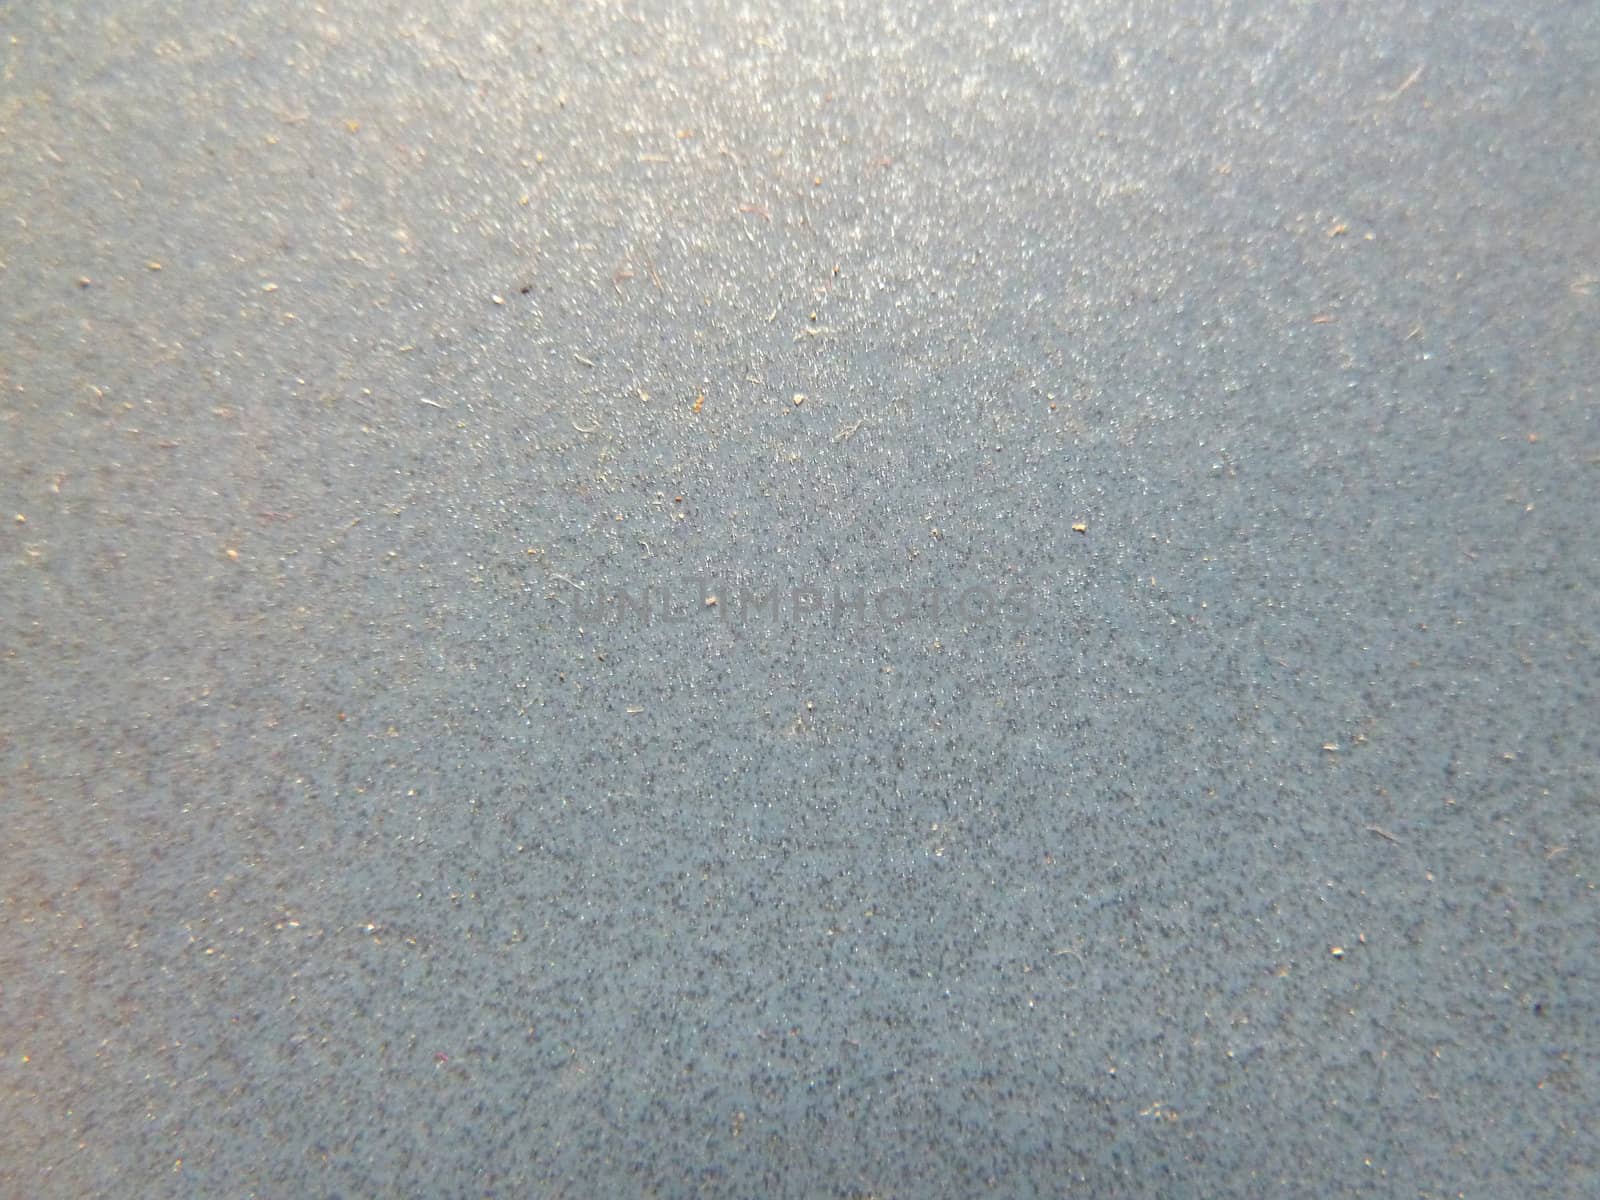 abstract silver surface as a background